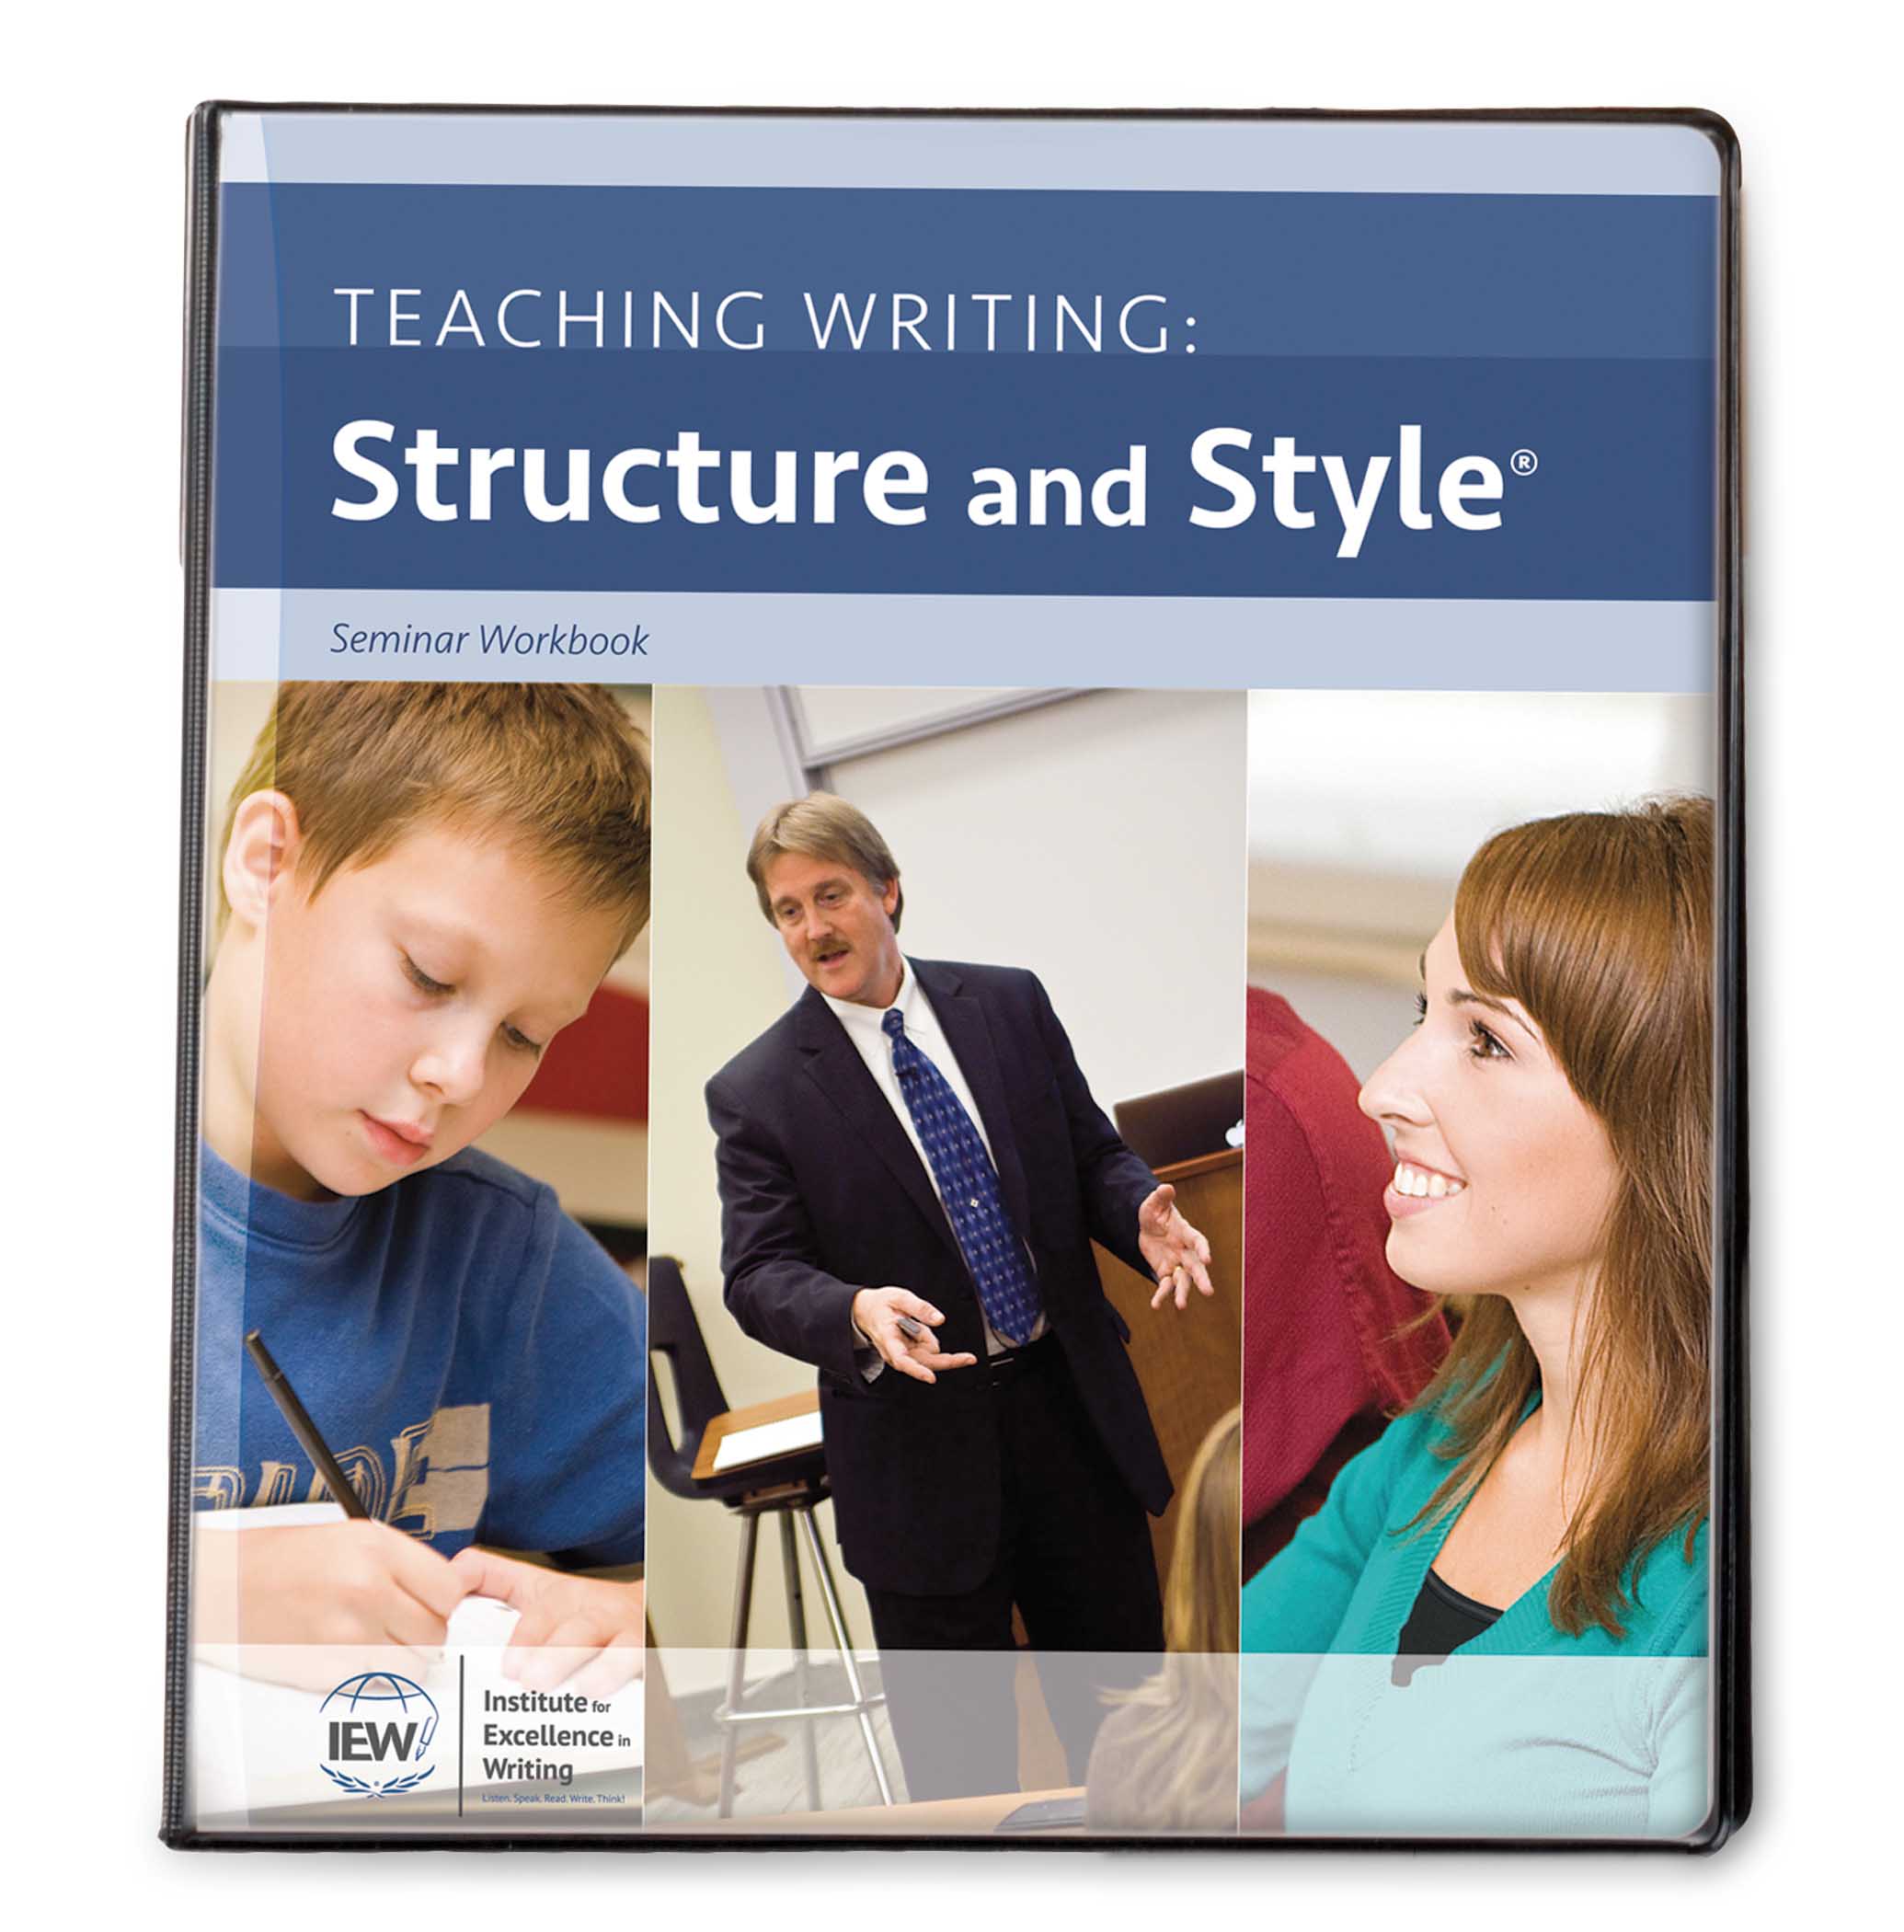 Teaching Writing: Structure and Style®, Second Edition [Seminar Workbook]